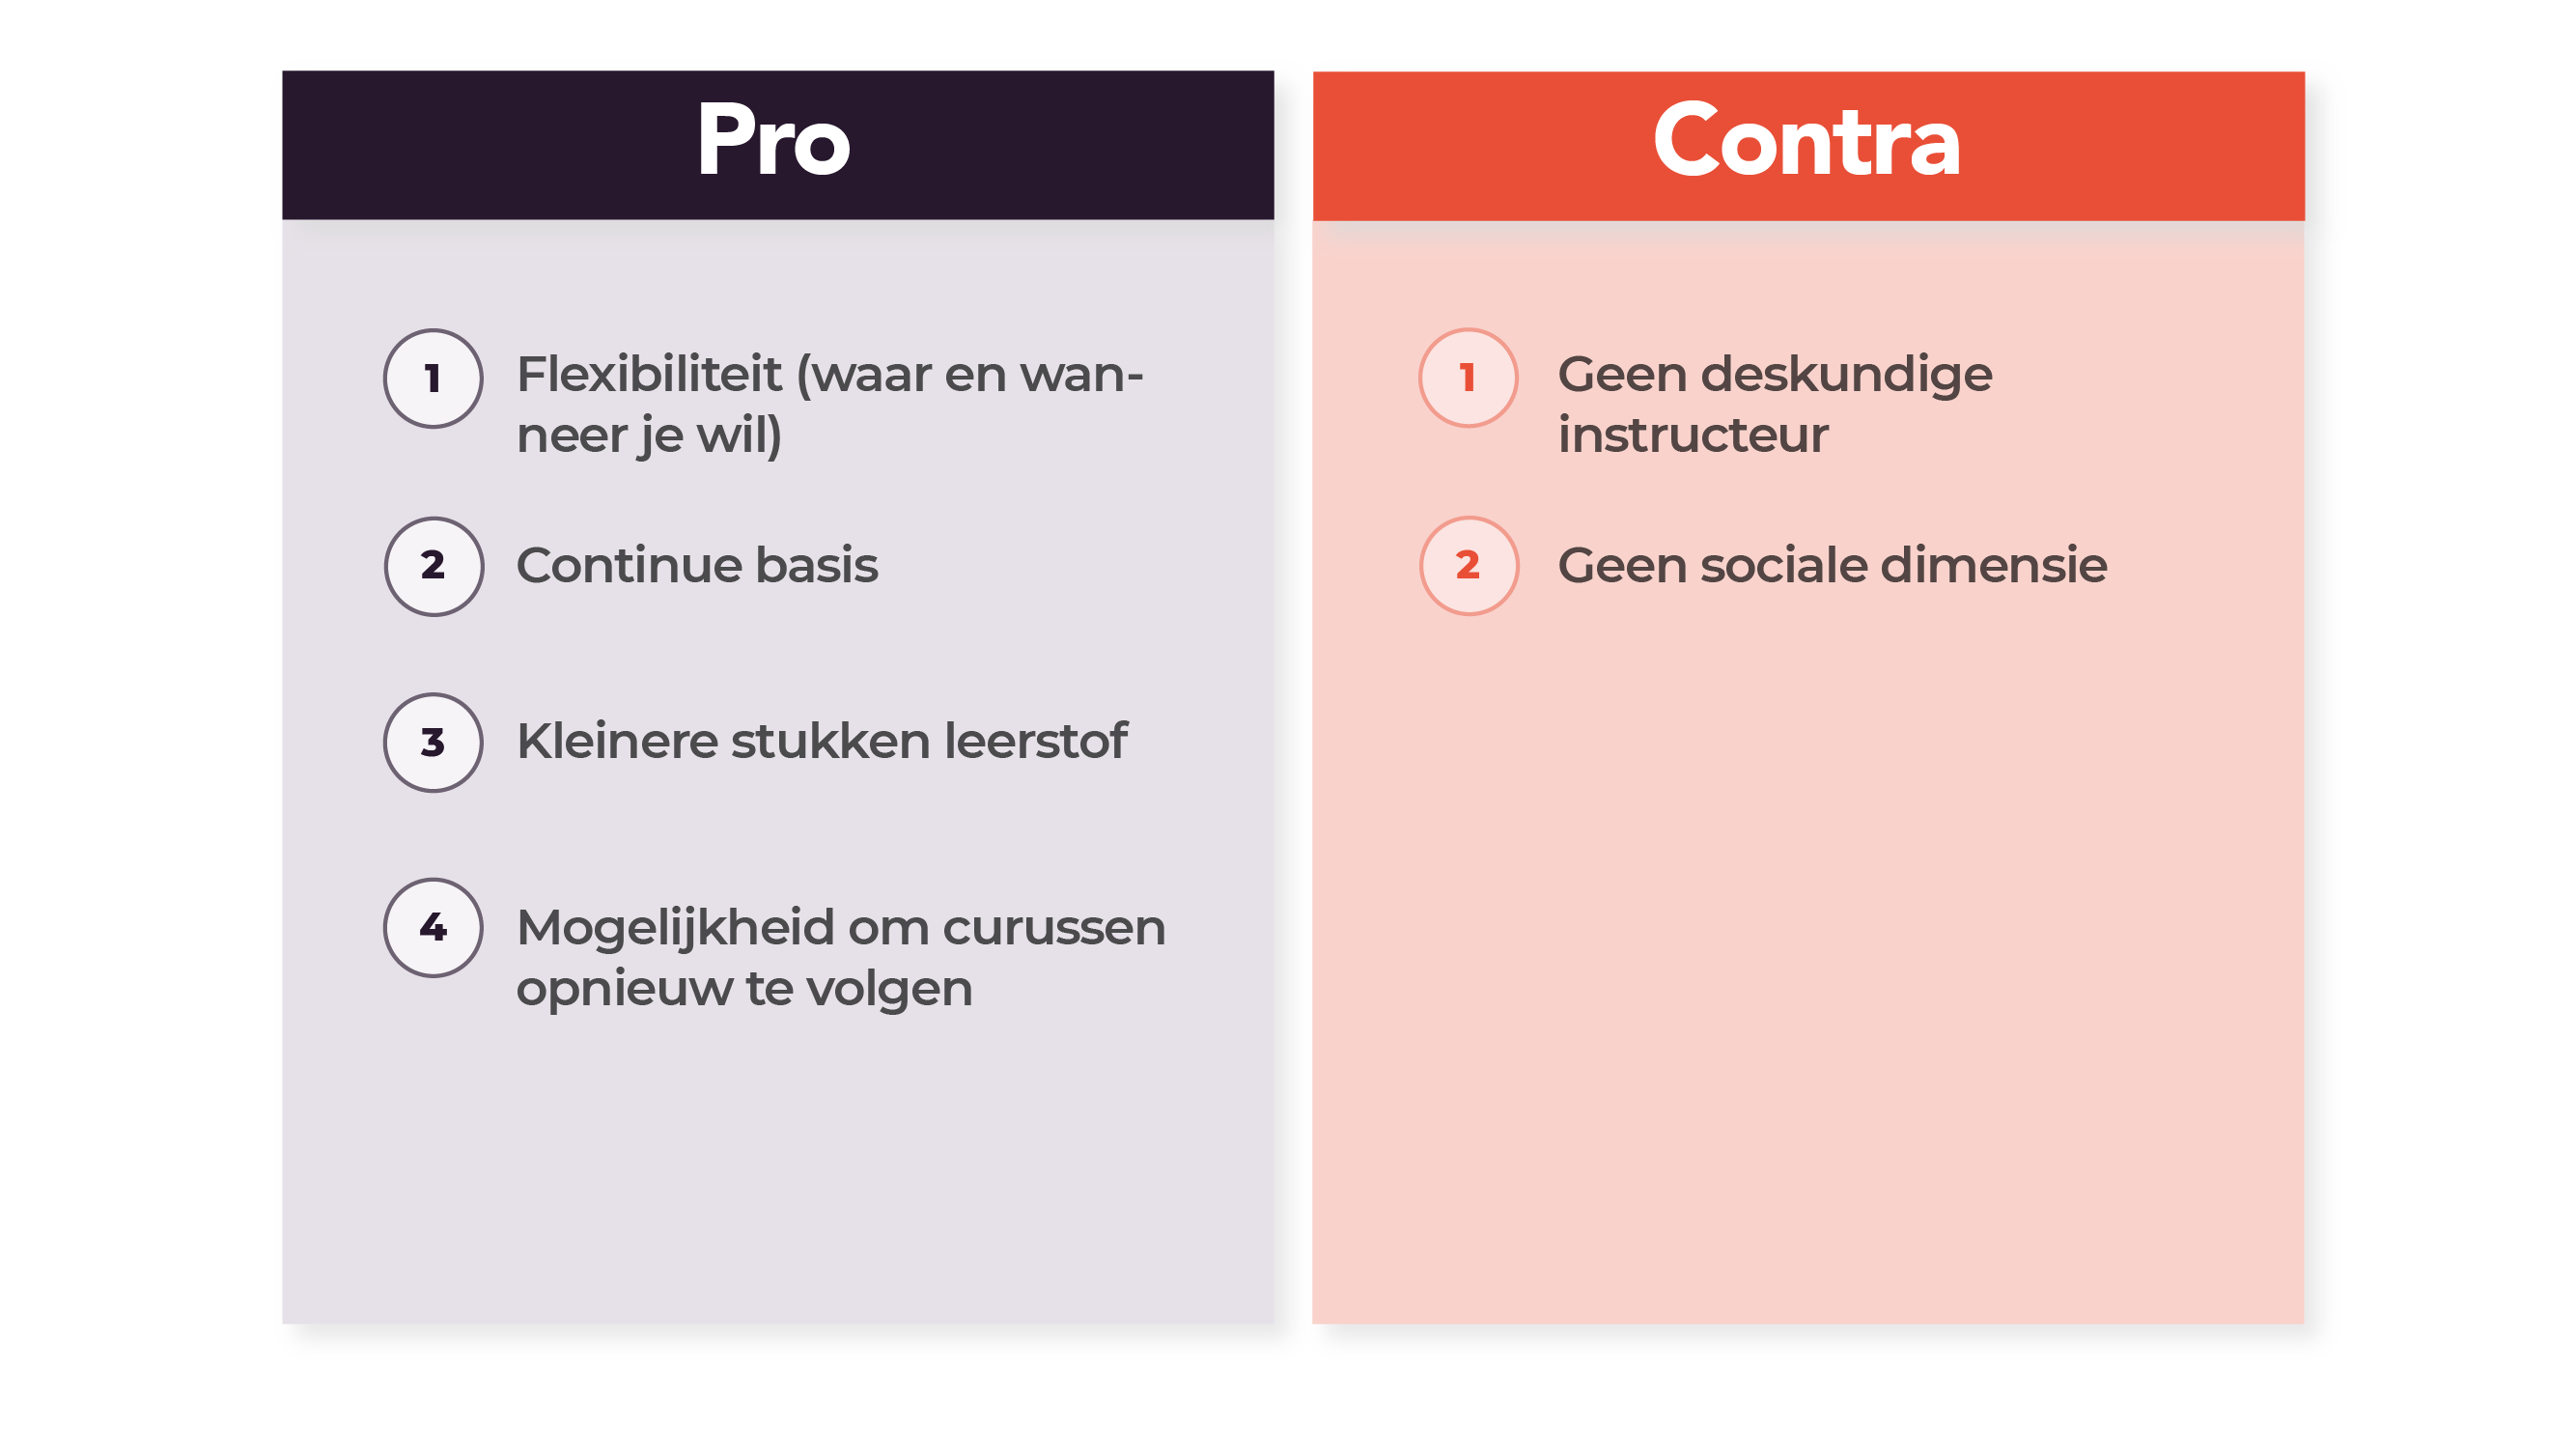 Pros and cons - NL version 2